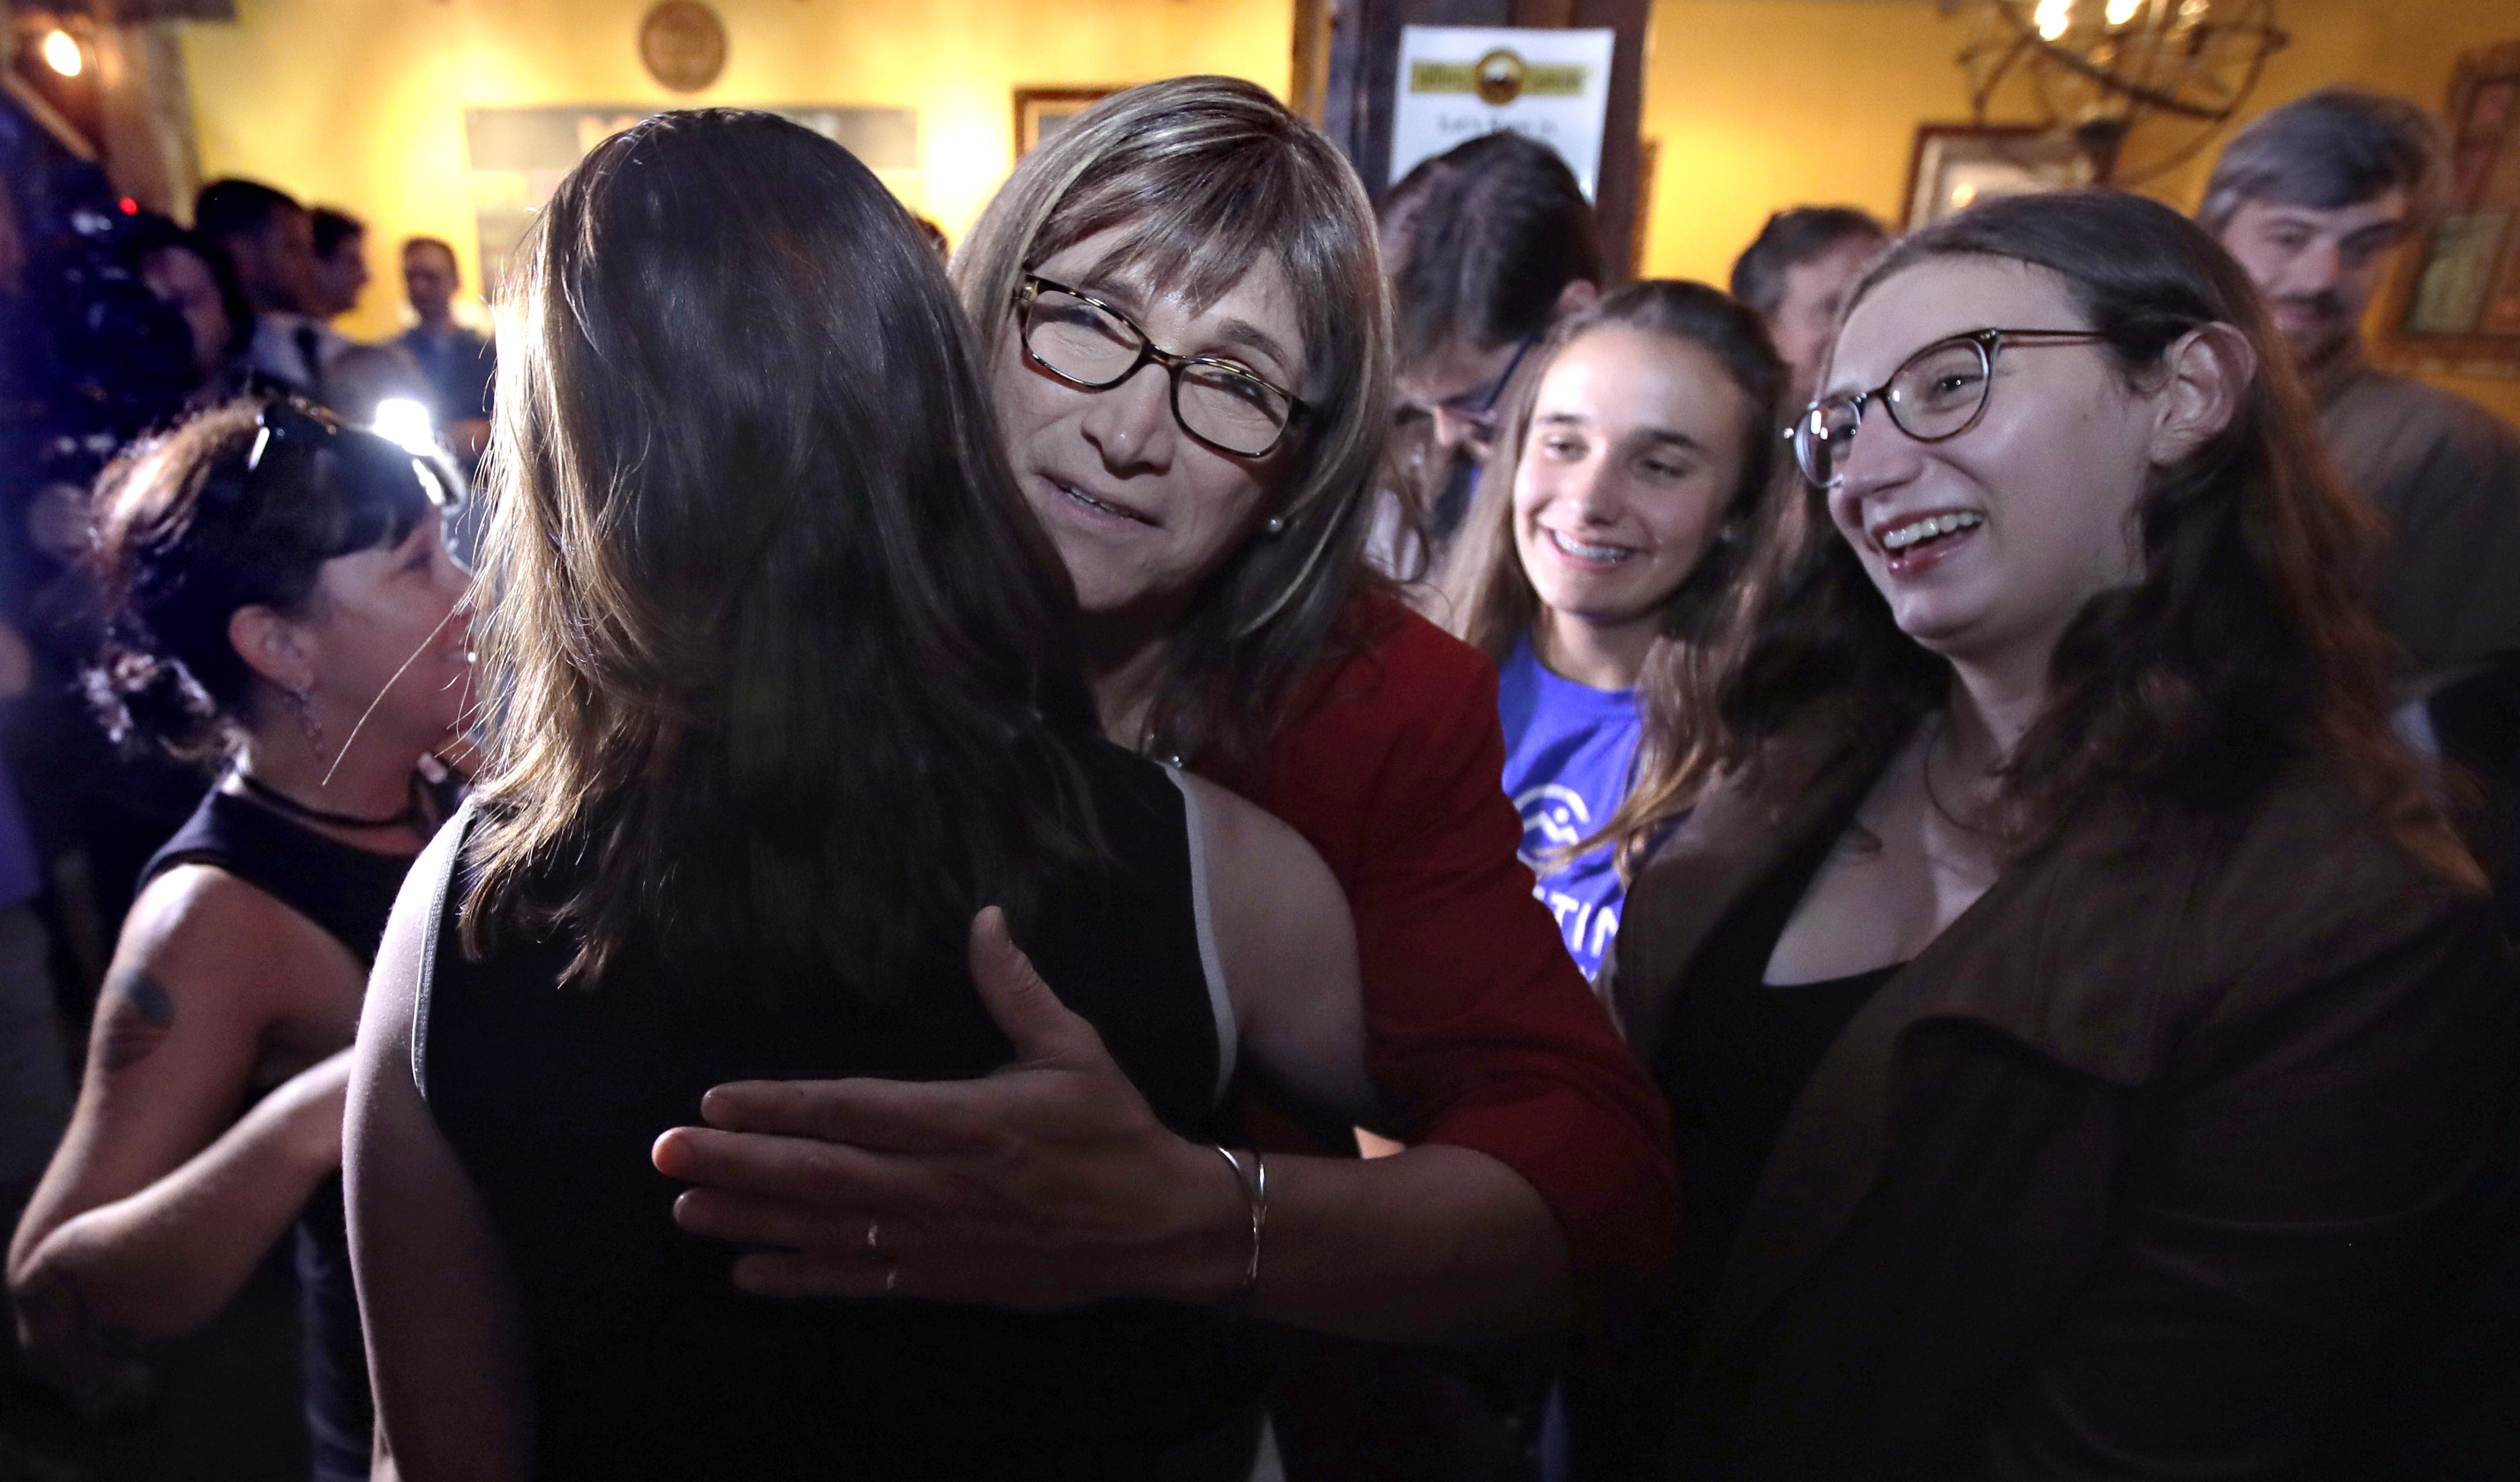 Vermont Democratic gubernatorial candidate Christine Hallquist, center, a transgender woman and former electric company executive, embraces supporters after claiming victory during her election night party in Burlington, Vermont on Tuesday.